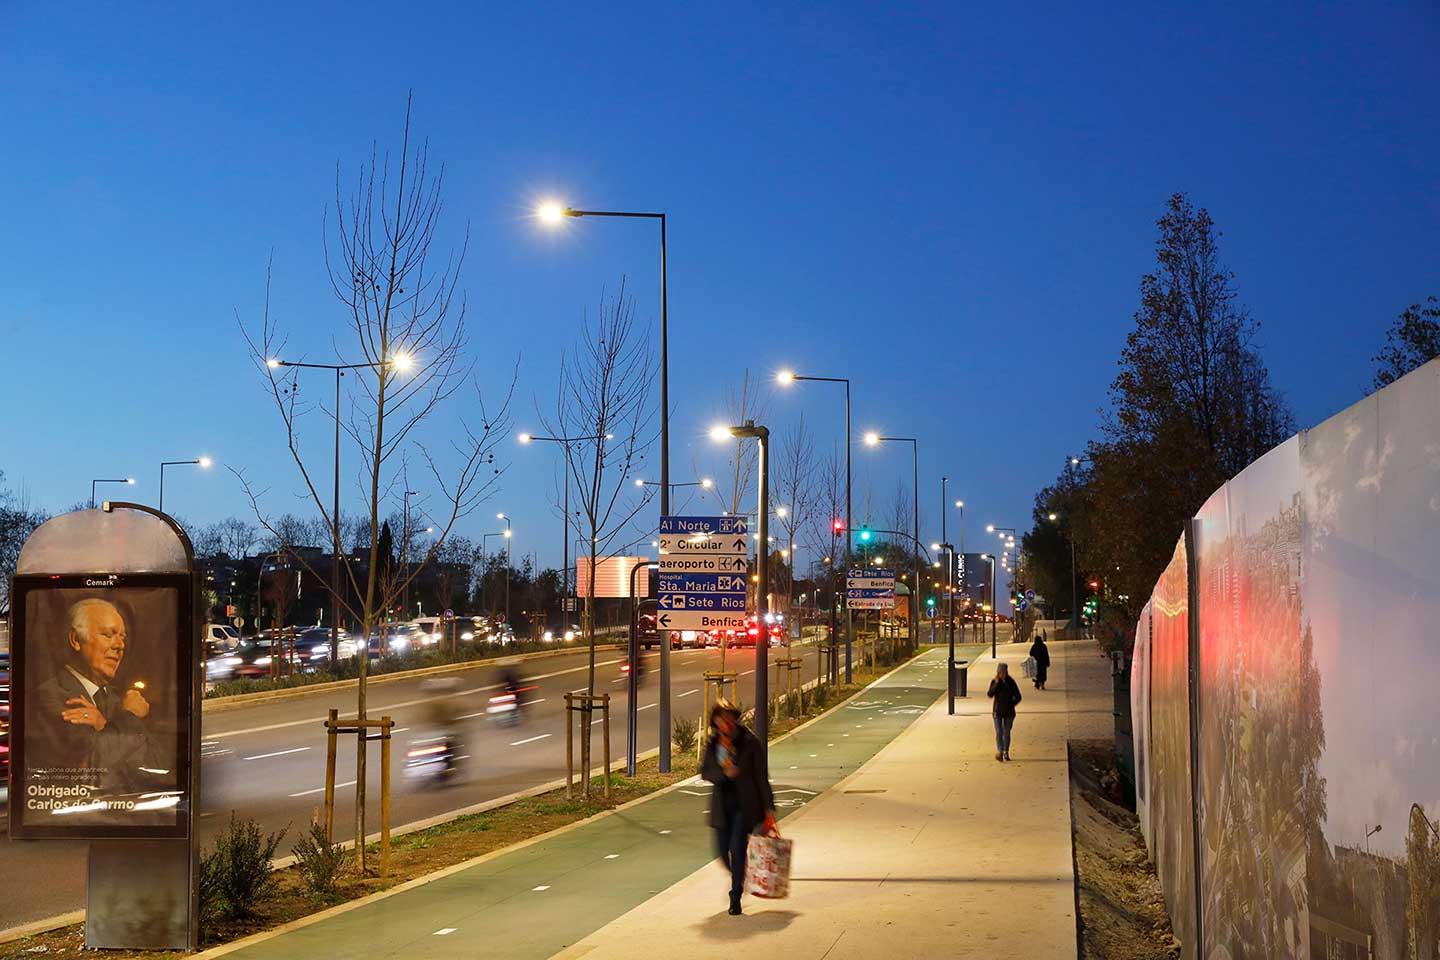 IZYLUM road luminaire has improved safety for pedestrian and cyclists crossing Praça de España in Lisbon while reducing operating costs